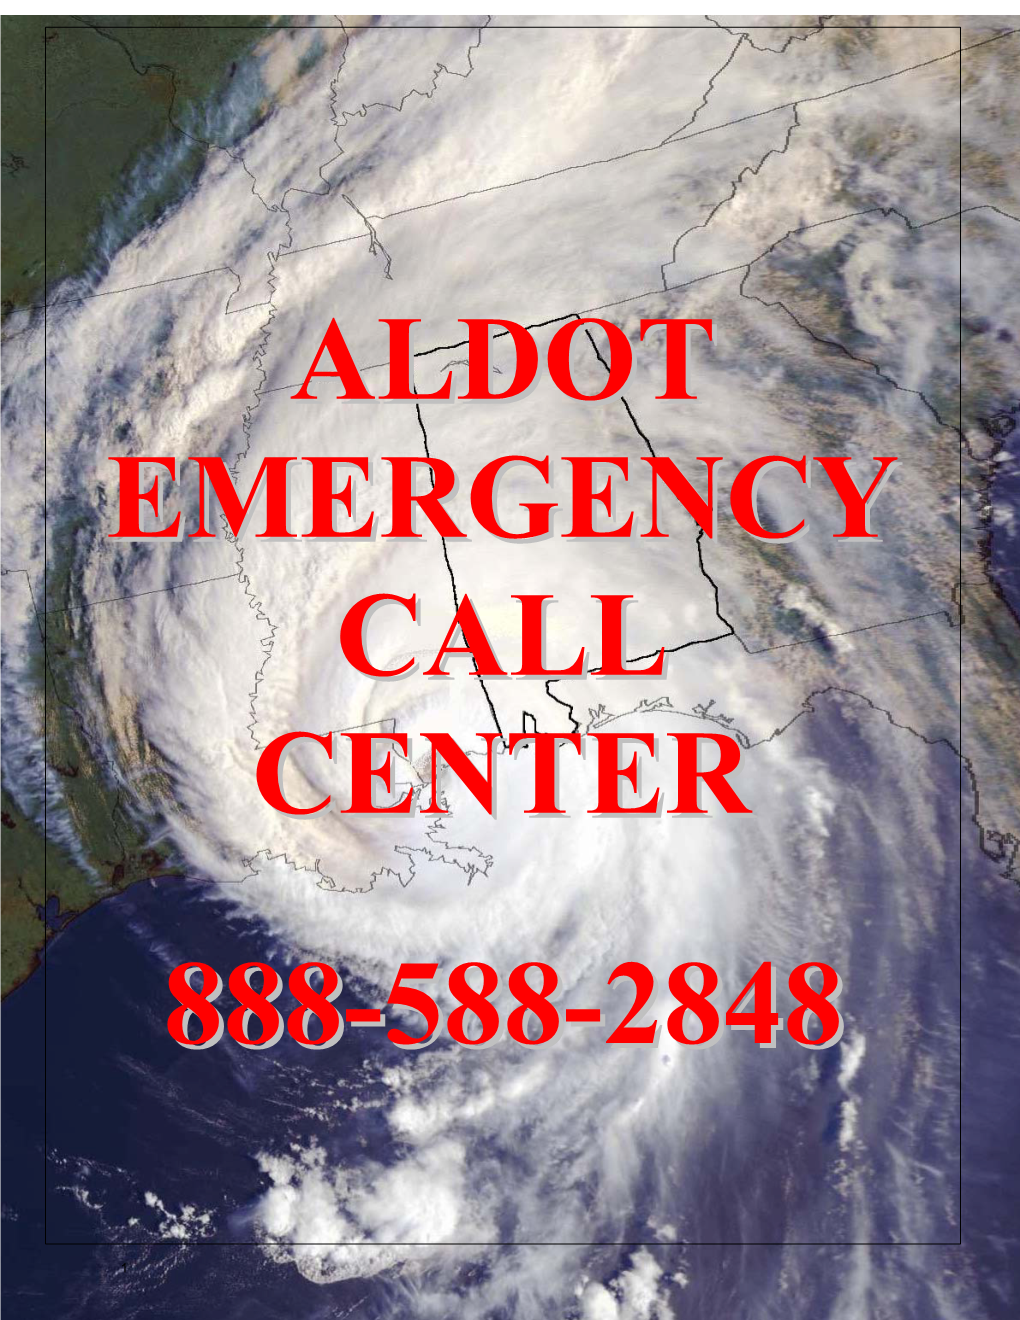 Aldot Emergency Call Center Mission-Introduction 888-588-2848 Toll Free 334-353-6650 Local